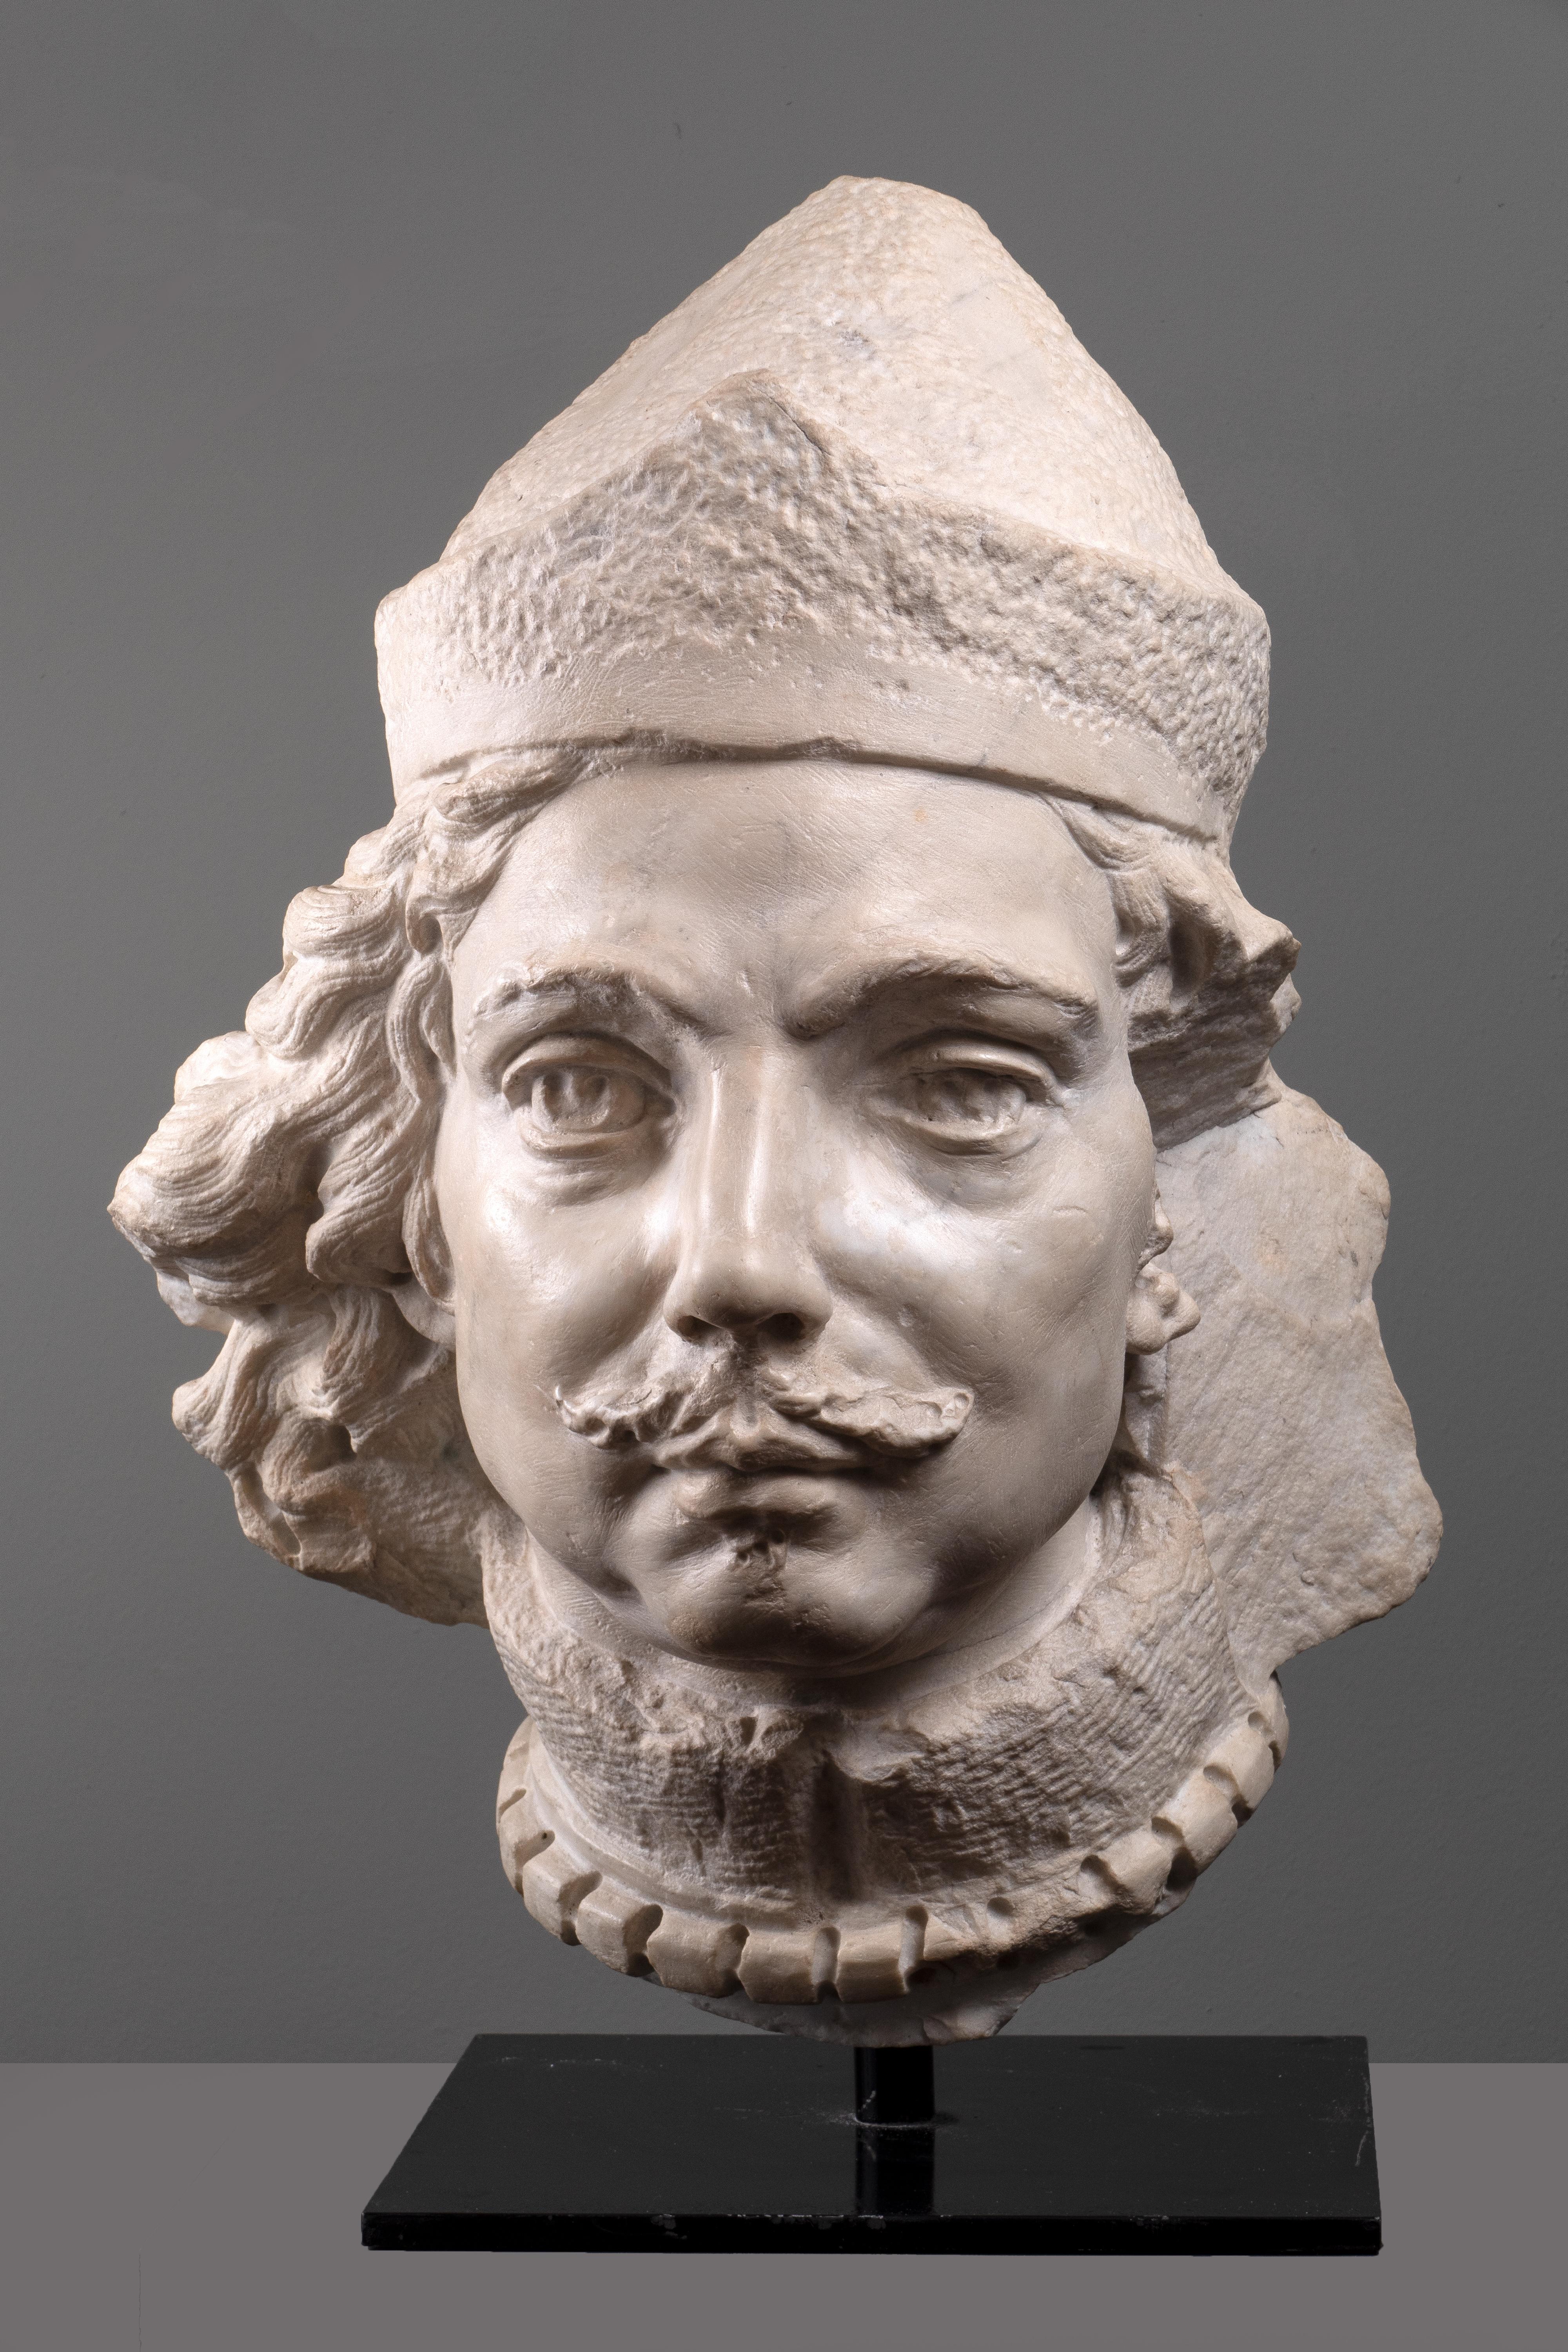 MARBLE PORTRAIT HEAD OF VENETIAN DOGE, Italy, 18th Century
Carrare marble
60 x 46 x 34 cm
23 1/2 x 18 x 13 1/2 in